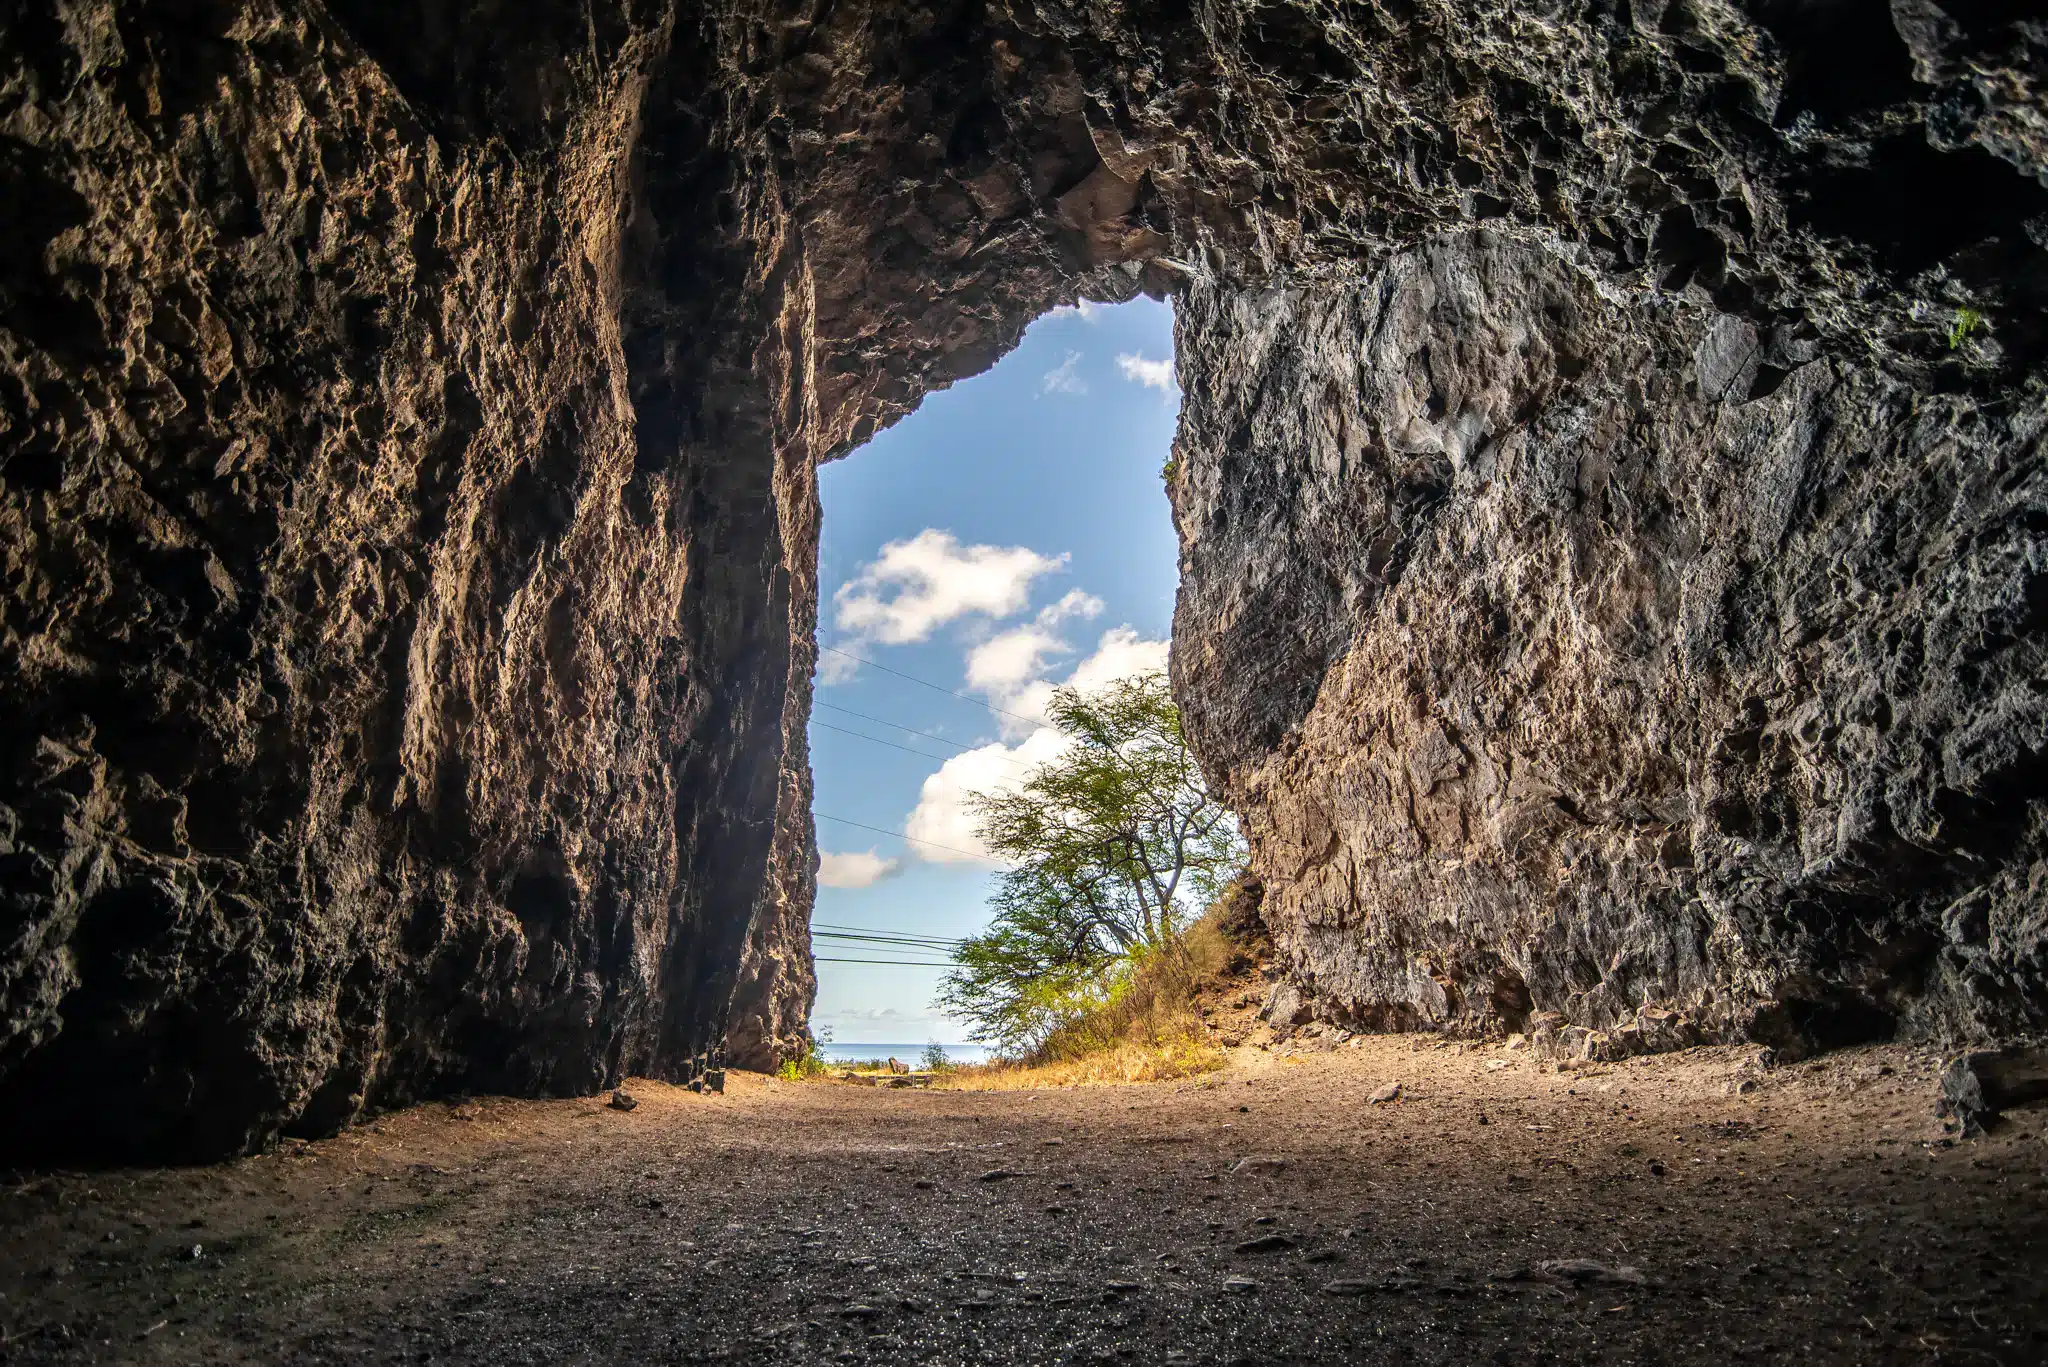 Kaneana Cave is a Heritage Site located in the city of Waianae on Oahu, Hawaii